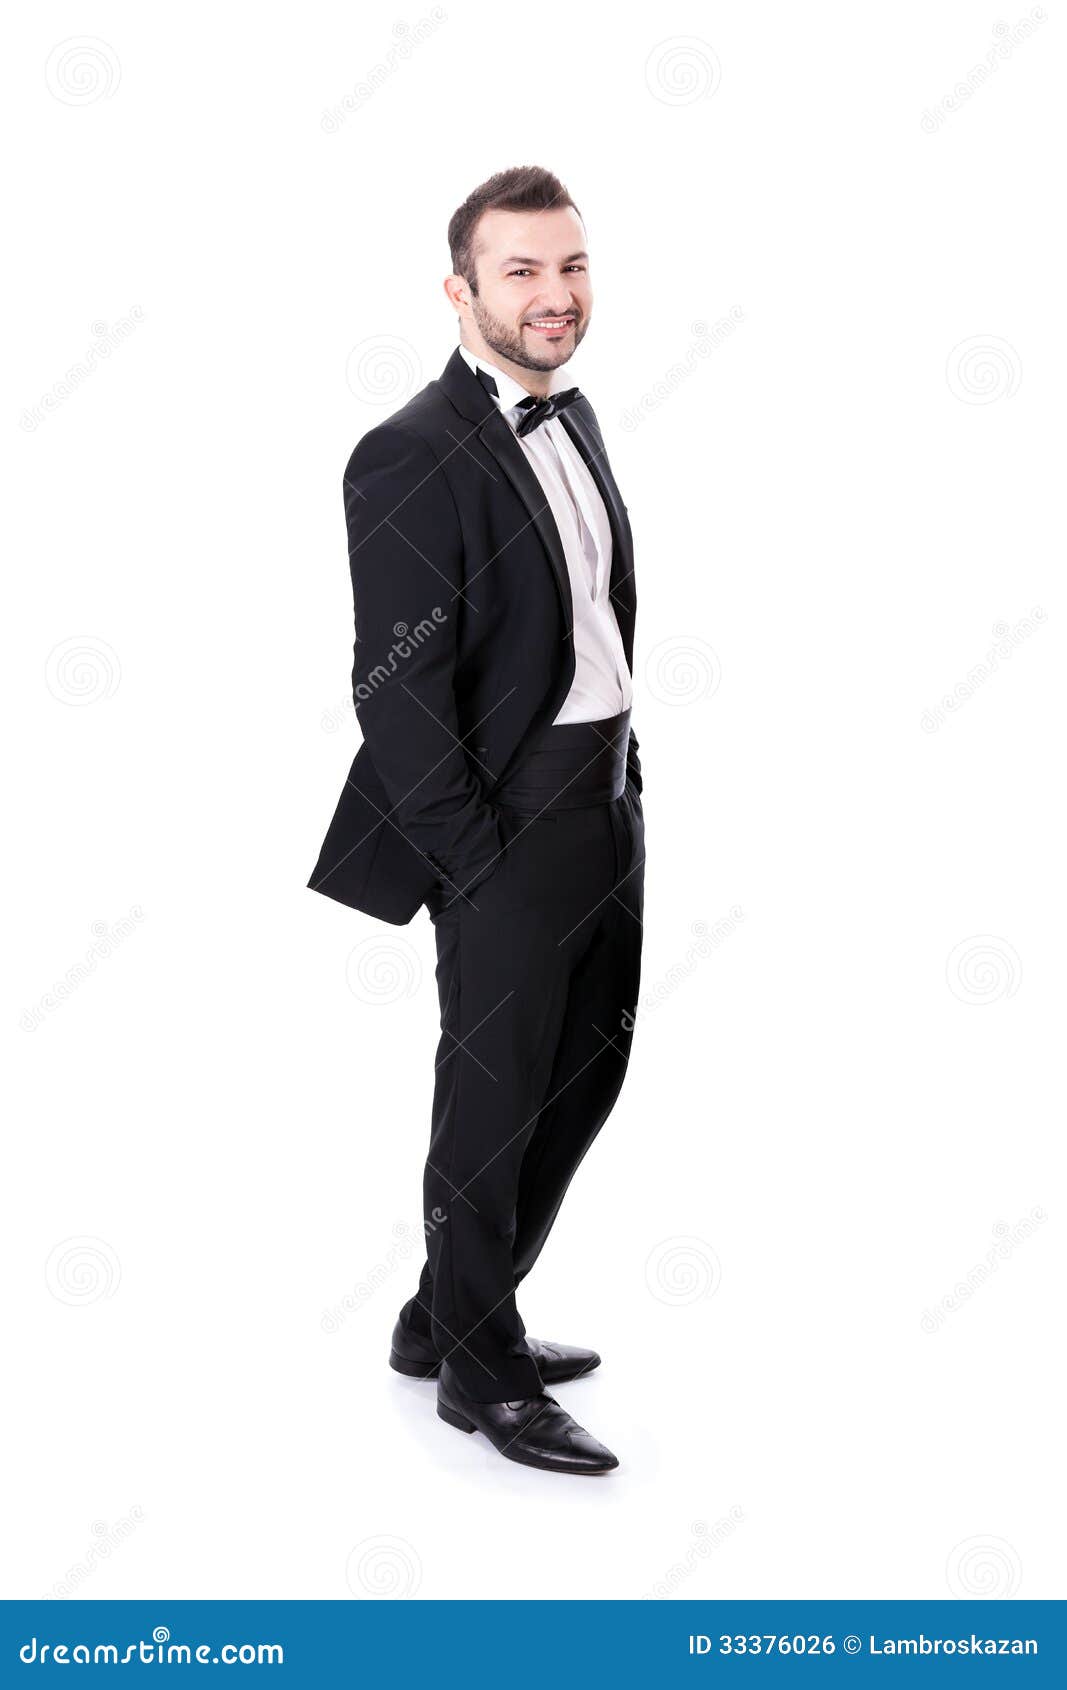 Confident Smart Looking Man Smiling Stock Photo - Image of model ...